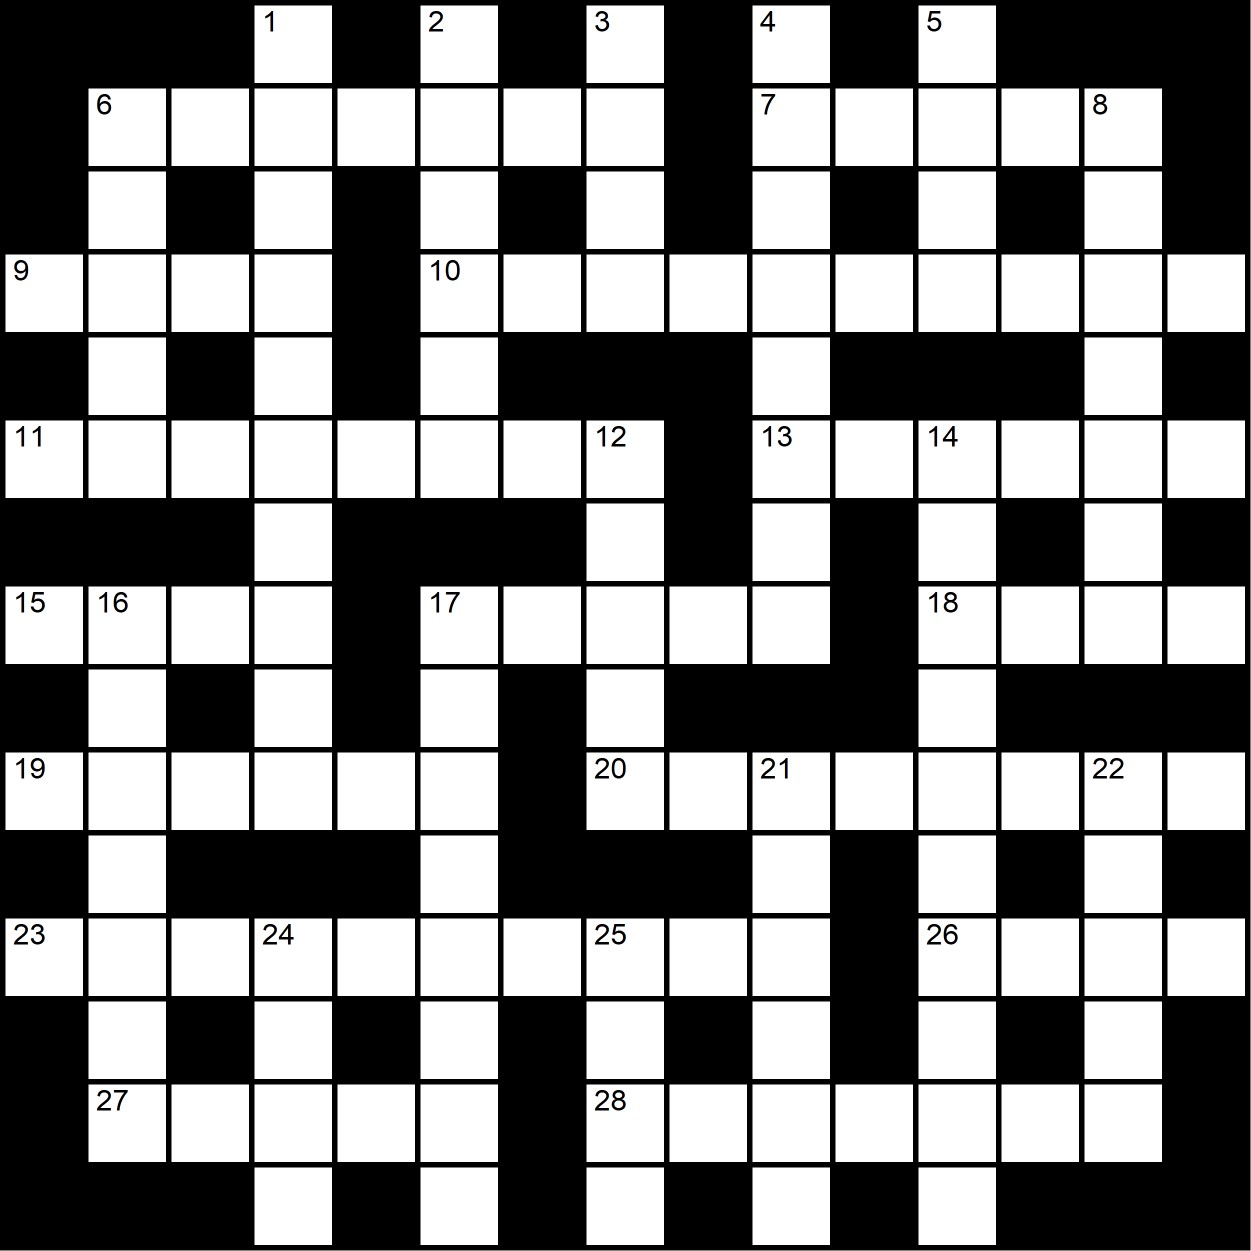 An invitingly empty cryptic crossword grid.